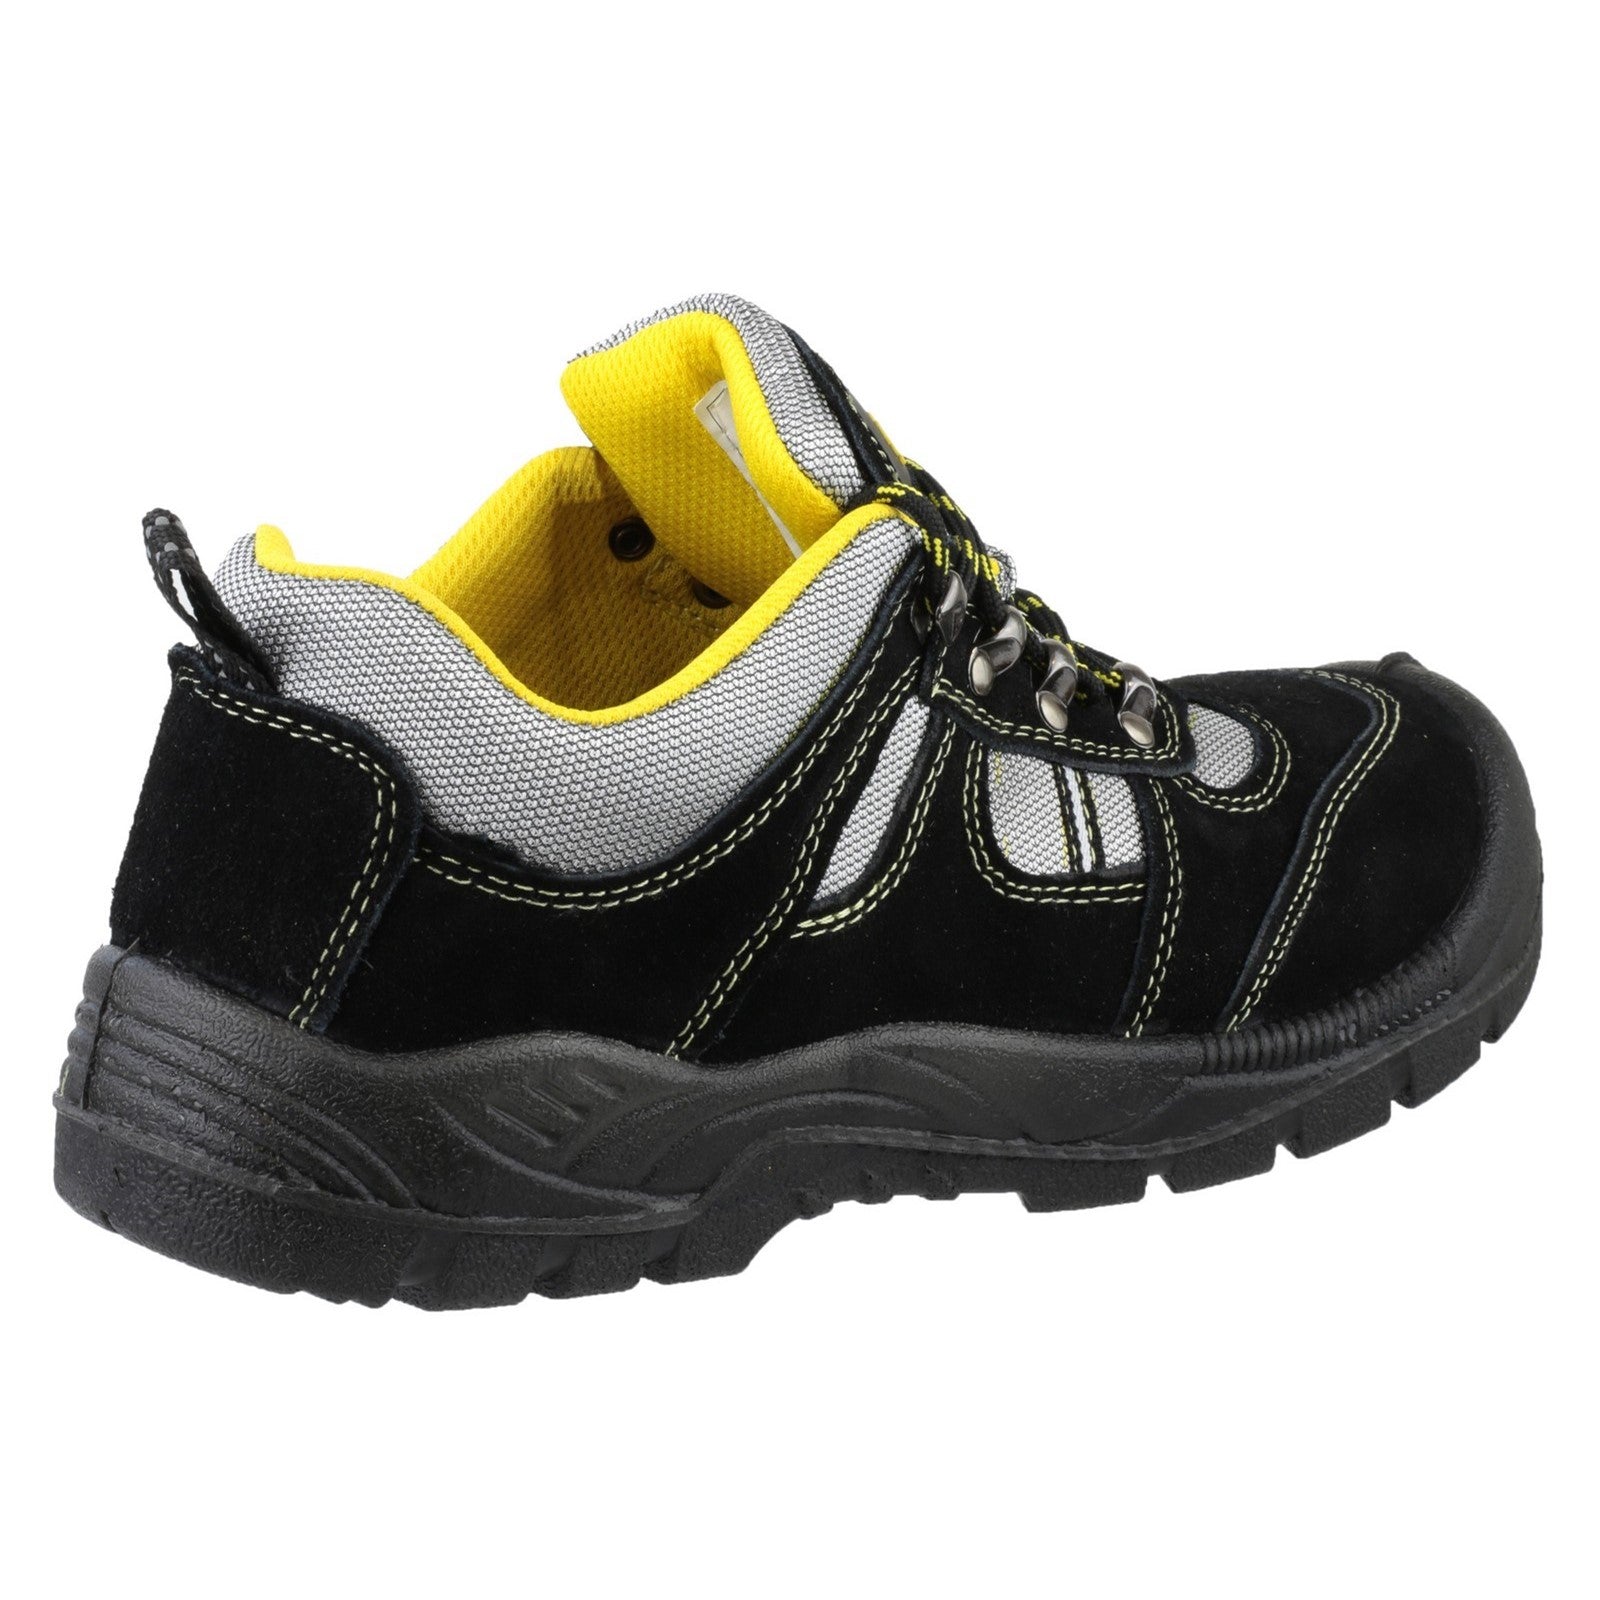 Amblers FS111 Lightweight Lace up Safety Trainer